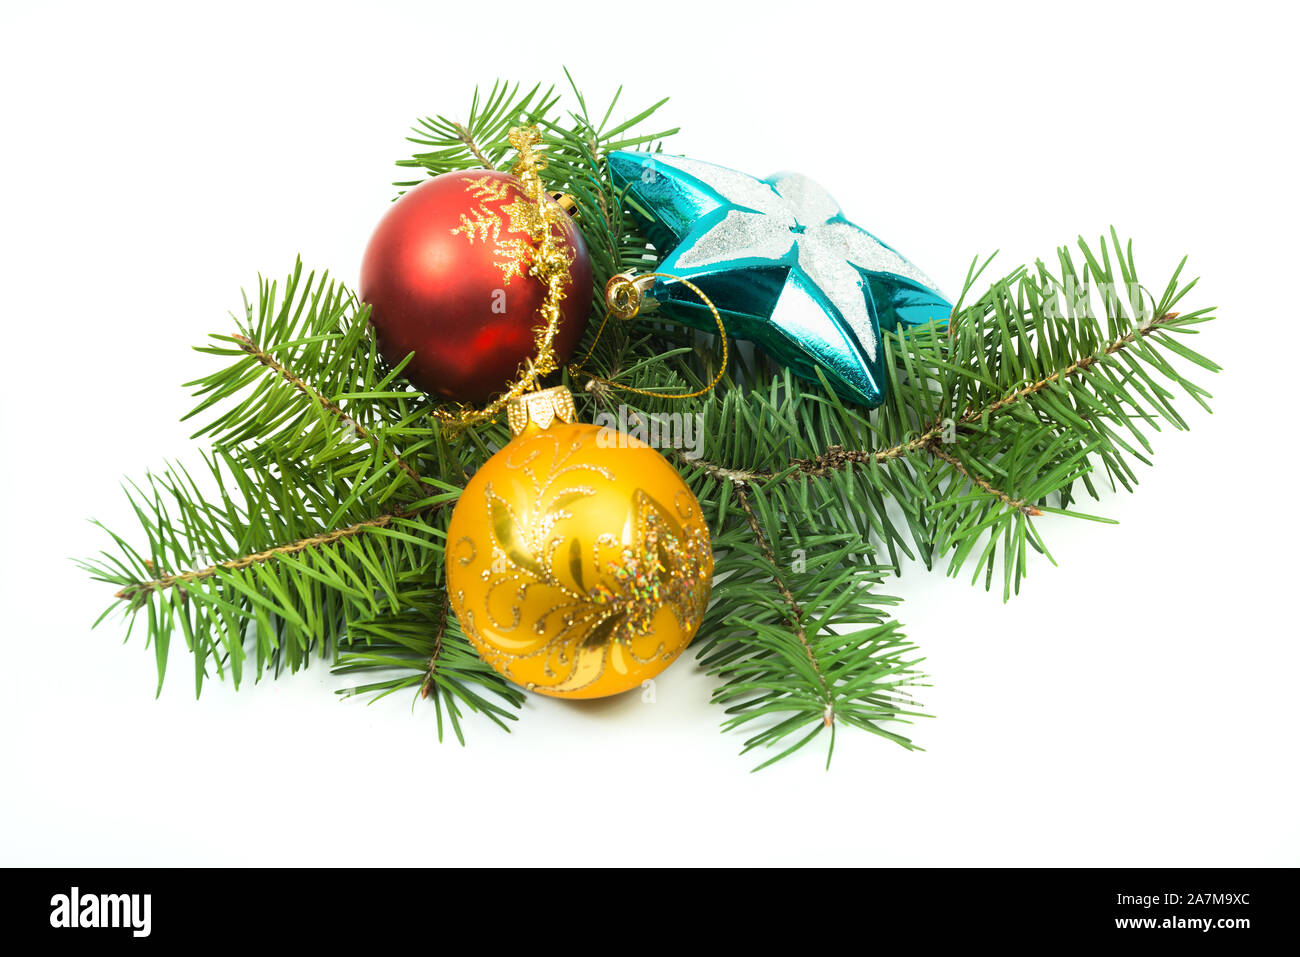 Spruce tree branch and Christmas decoration bauble ball on a white background Stock Photo